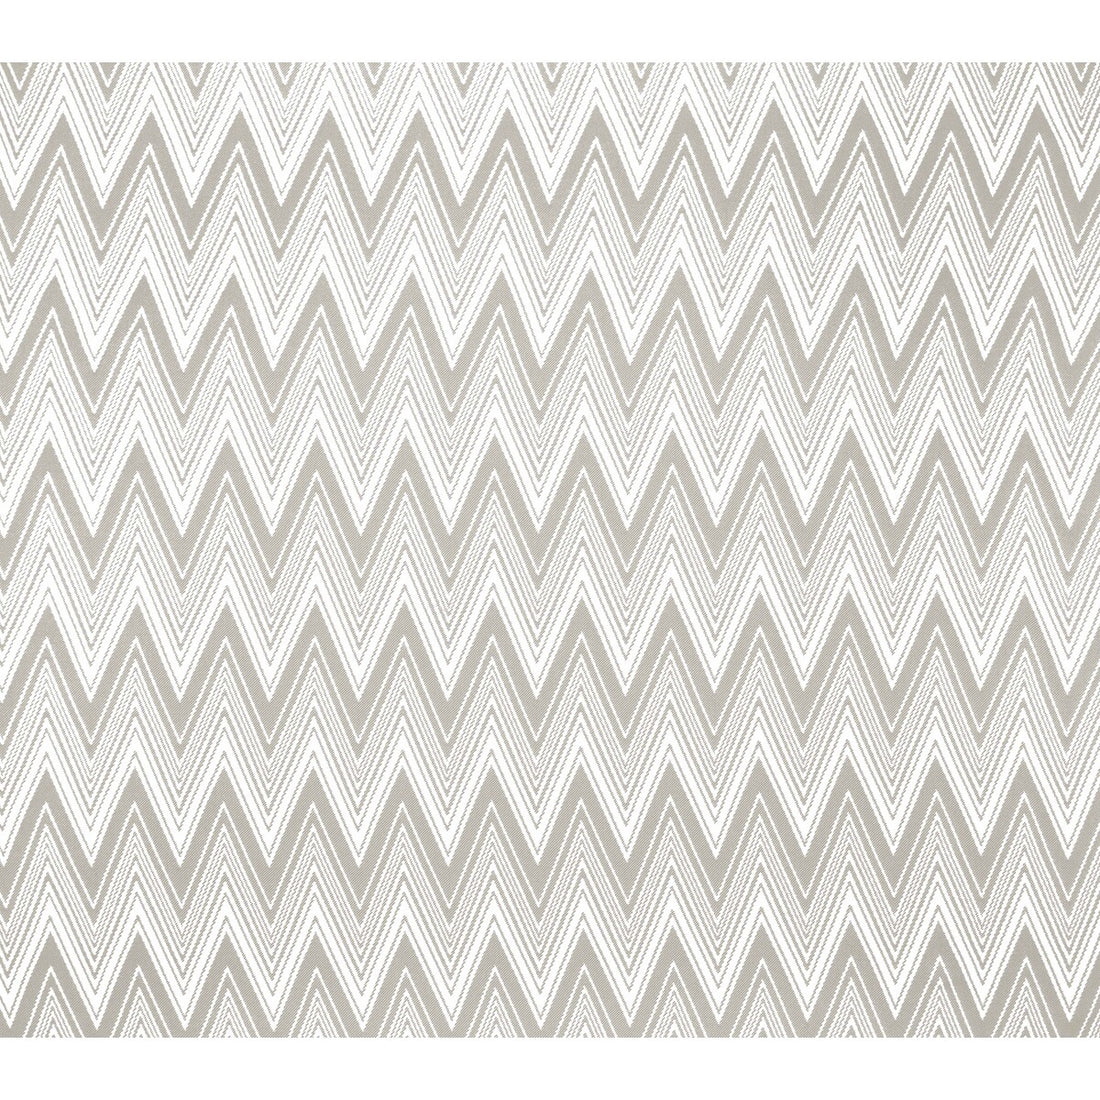 Grace fabric in beige color - pattern GDT5381.7.0 - by Gaston y Daniela in the Gaston Africalia collection